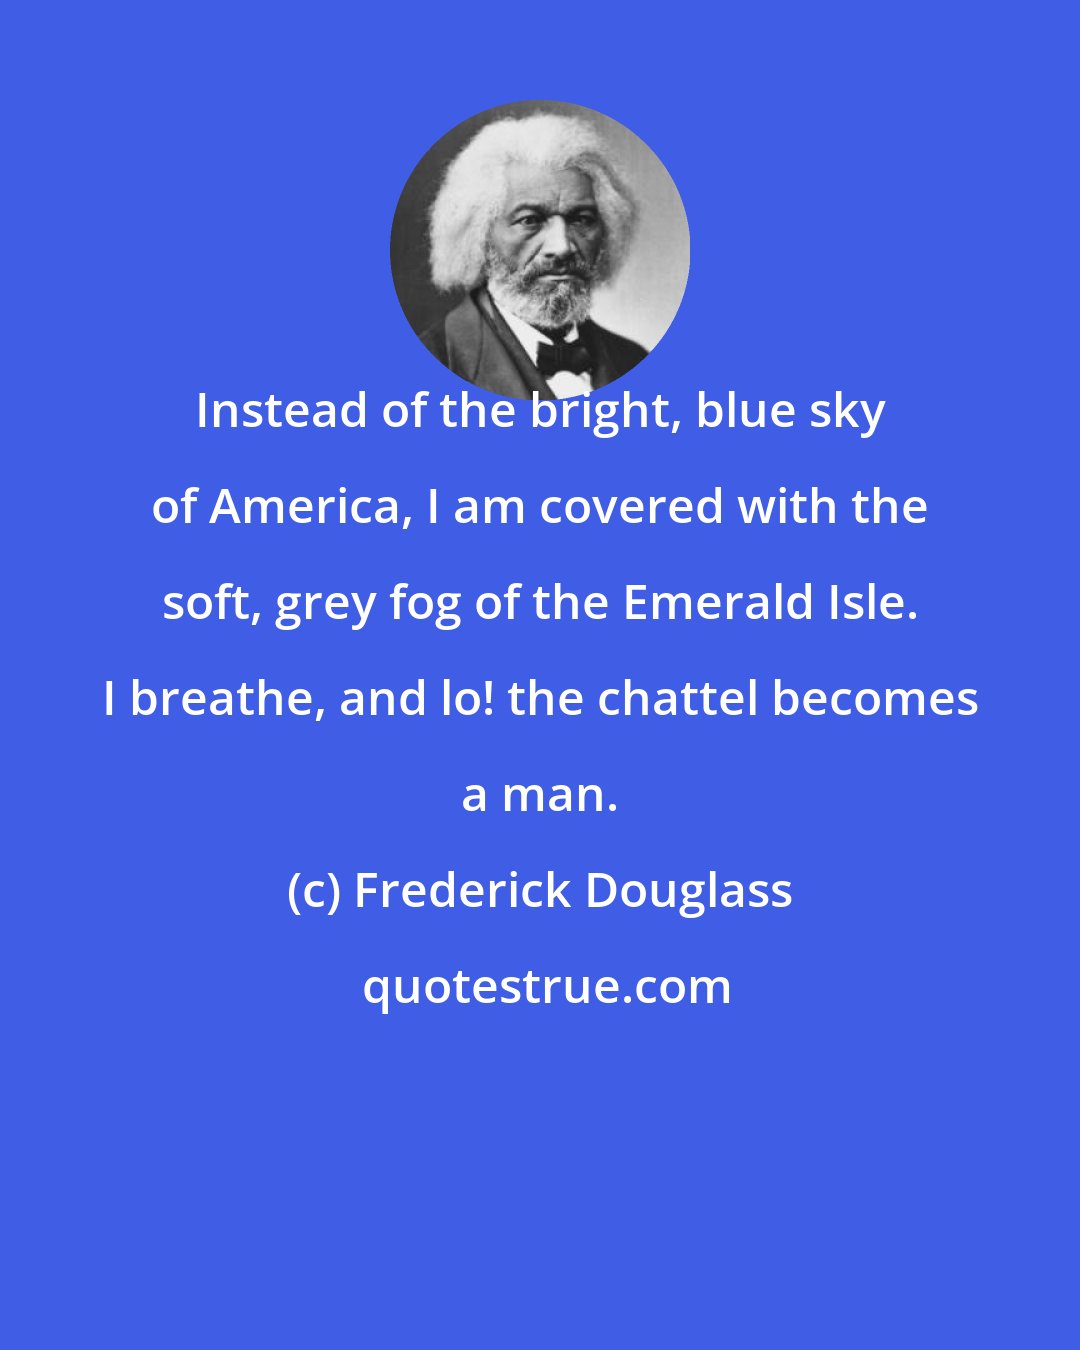 Frederick Douglass: Instead of the bright, blue sky of America, I am covered with the soft, grey fog of the Emerald Isle. I breathe, and lo! the chattel becomes a man.